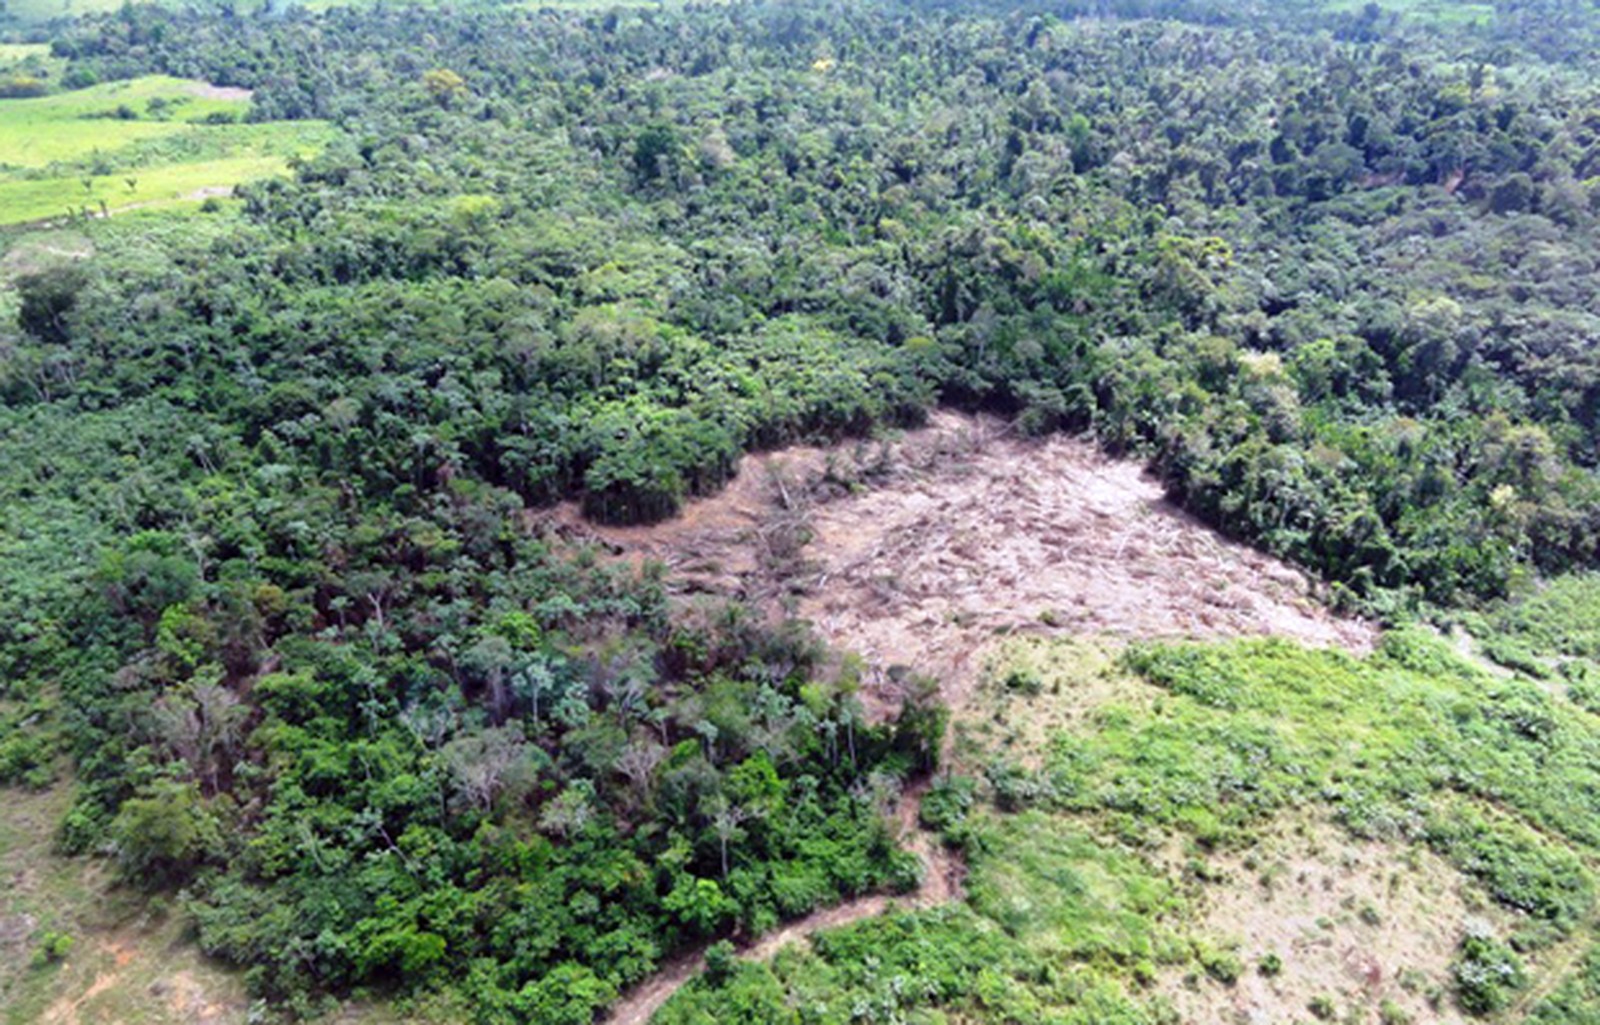 Protected areas in the Amazon have already lost the equivalent to six cities the size of São Paulo in vegetation in three decades.